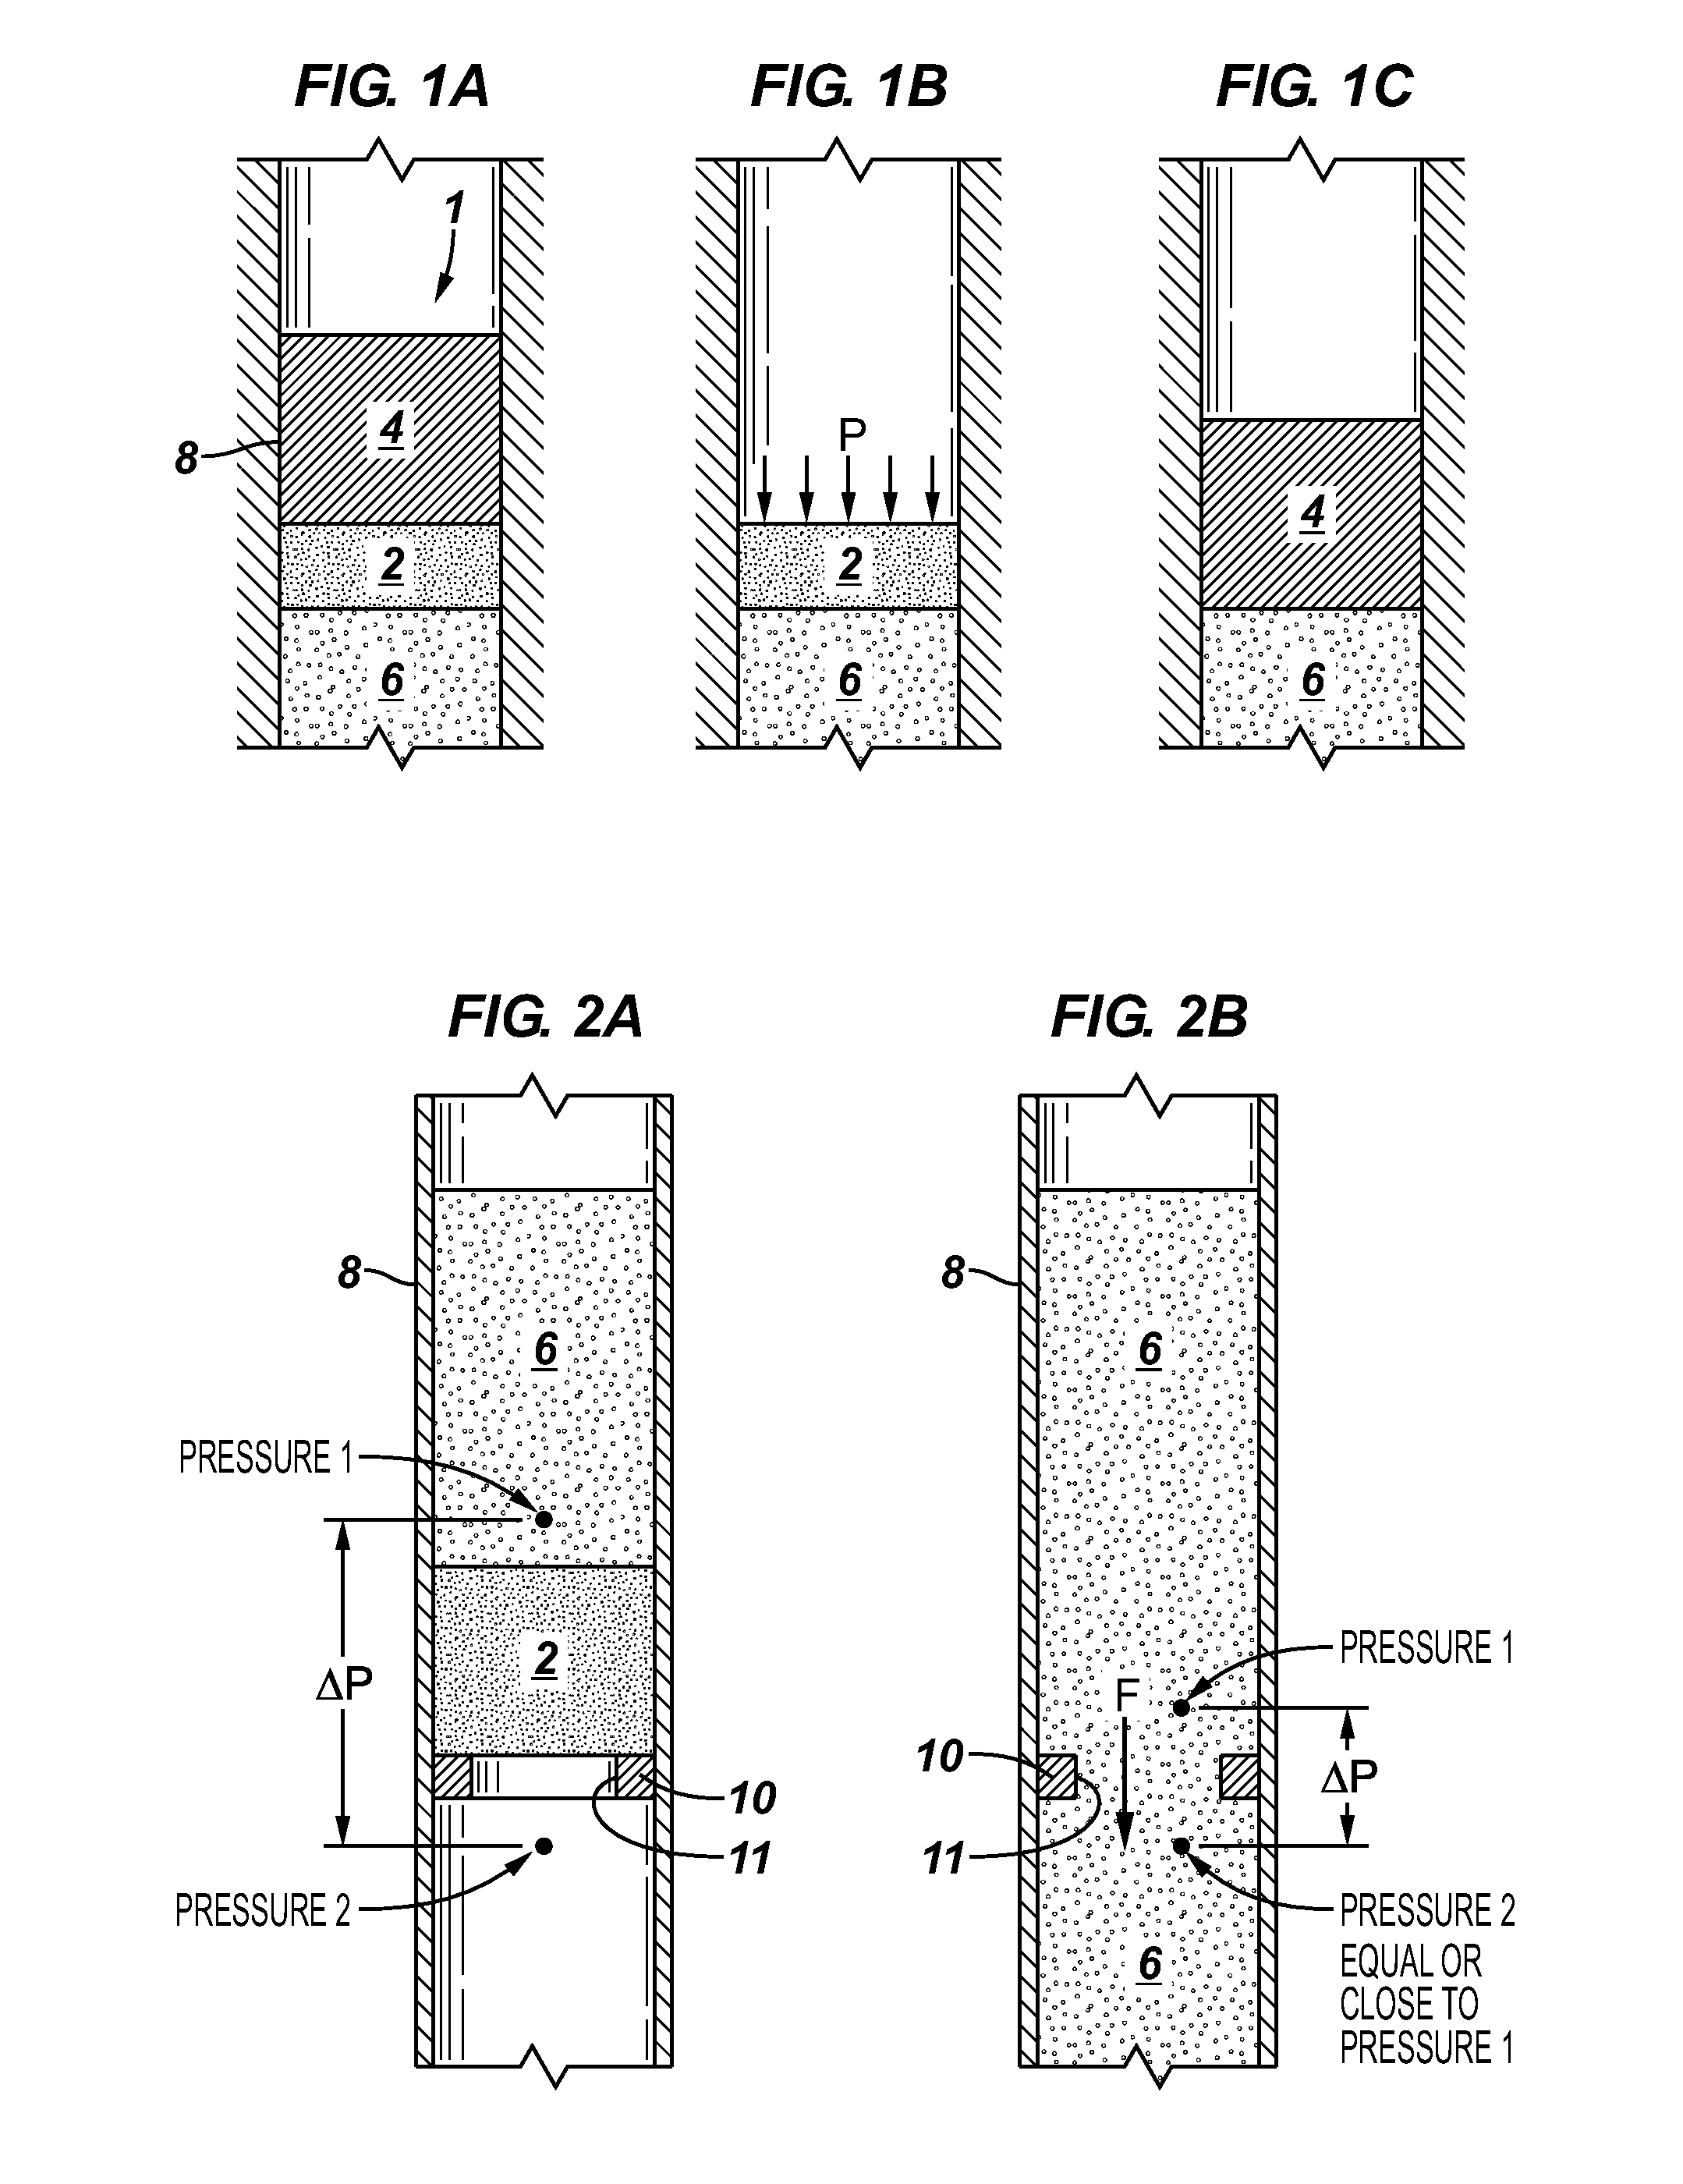 Degradable compositions, apparatus comprising same, and methods of use